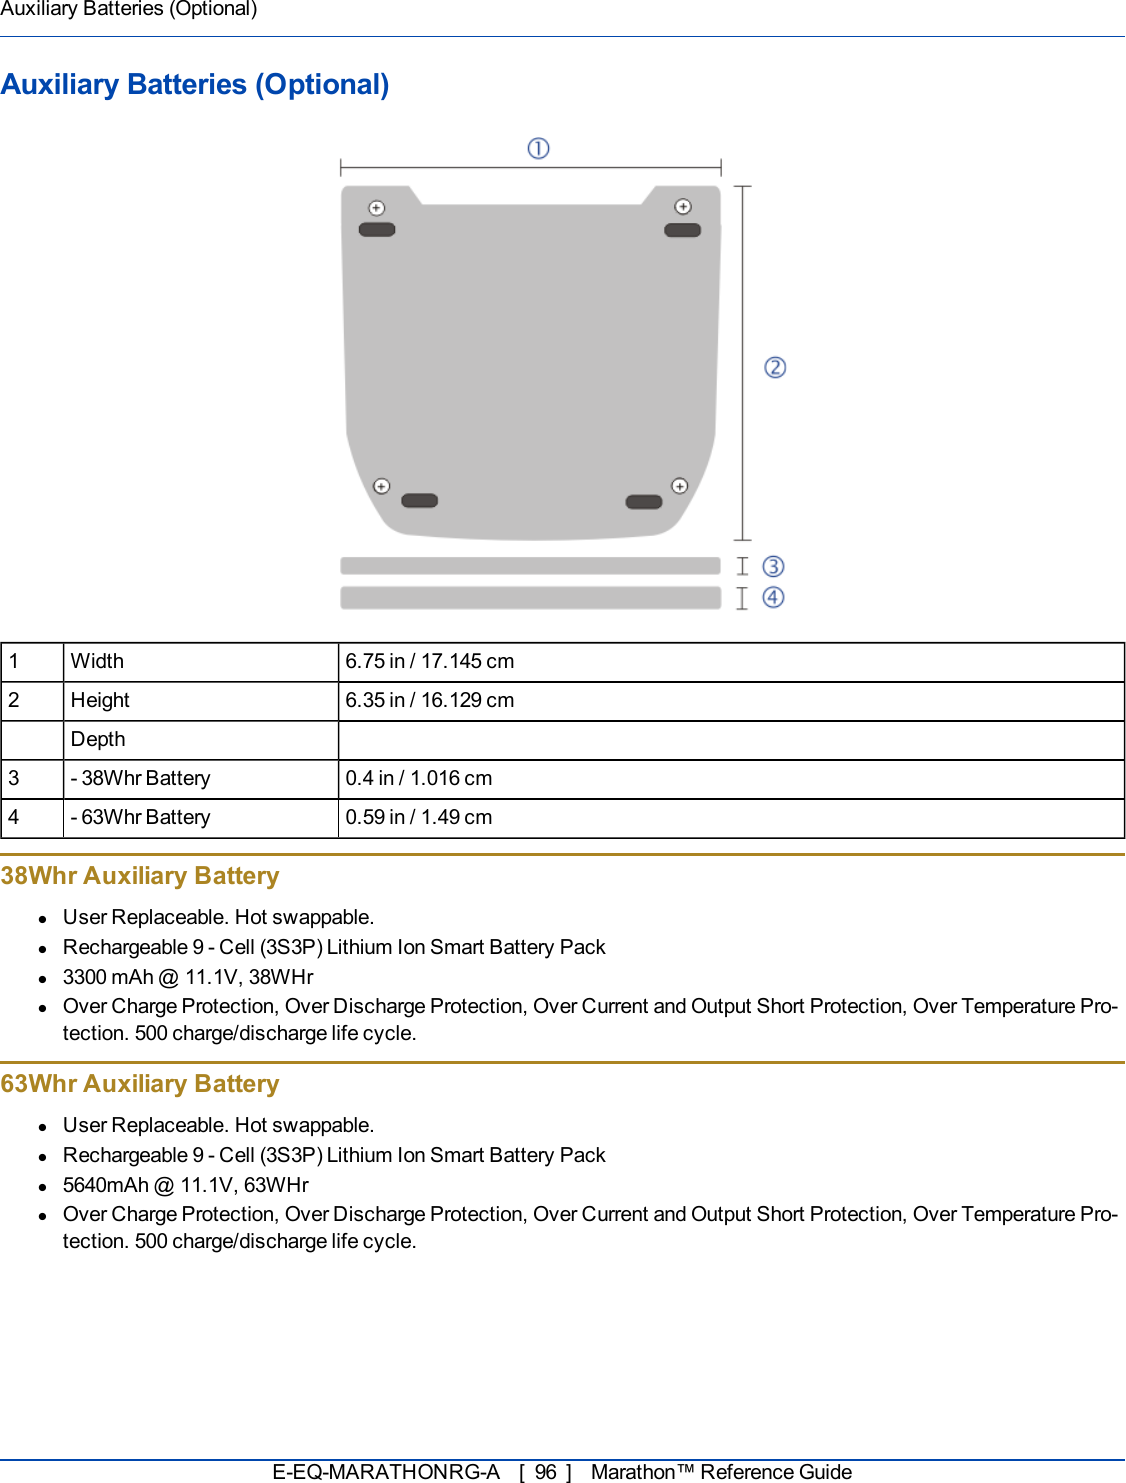 Auxiliary Batteries (Optional)Auxiliary Batteries (Optional)1 Width 6.75 in / 17.145 cm2 Height 6.35 in / 16.129 cmDepth3 - 38Whr Battery 0.4 in / 1.016 cm4 - 63Whr Battery 0.59 in / 1.49 cm38Whr Auxiliary BatterylUser Replaceable. Hot swappable.lRechargeable 9 - Cell (3S3P) Lithium Ion Smart Battery Packl3300 mAh @ 11.1V, 38WHrlOver Charge Protection, Over Discharge Protection, Over Current and Output Short Protection, Over Temperature Pro-tection. 500 charge/discharge life cycle.63Whr Auxiliary BatterylUser Replaceable. Hot swappable.lRechargeable 9 - Cell (3S3P) Lithium Ion Smart Battery Packl5640mAh @ 11.1V, 63WHrlOver Charge Protection, Over Discharge Protection, Over Current and Output Short Protection, Over Temperature Pro-tection. 500 charge/discharge life cycle.E-EQ-MARATHONRG-A [ 96 ] Marathon™ Reference Guide